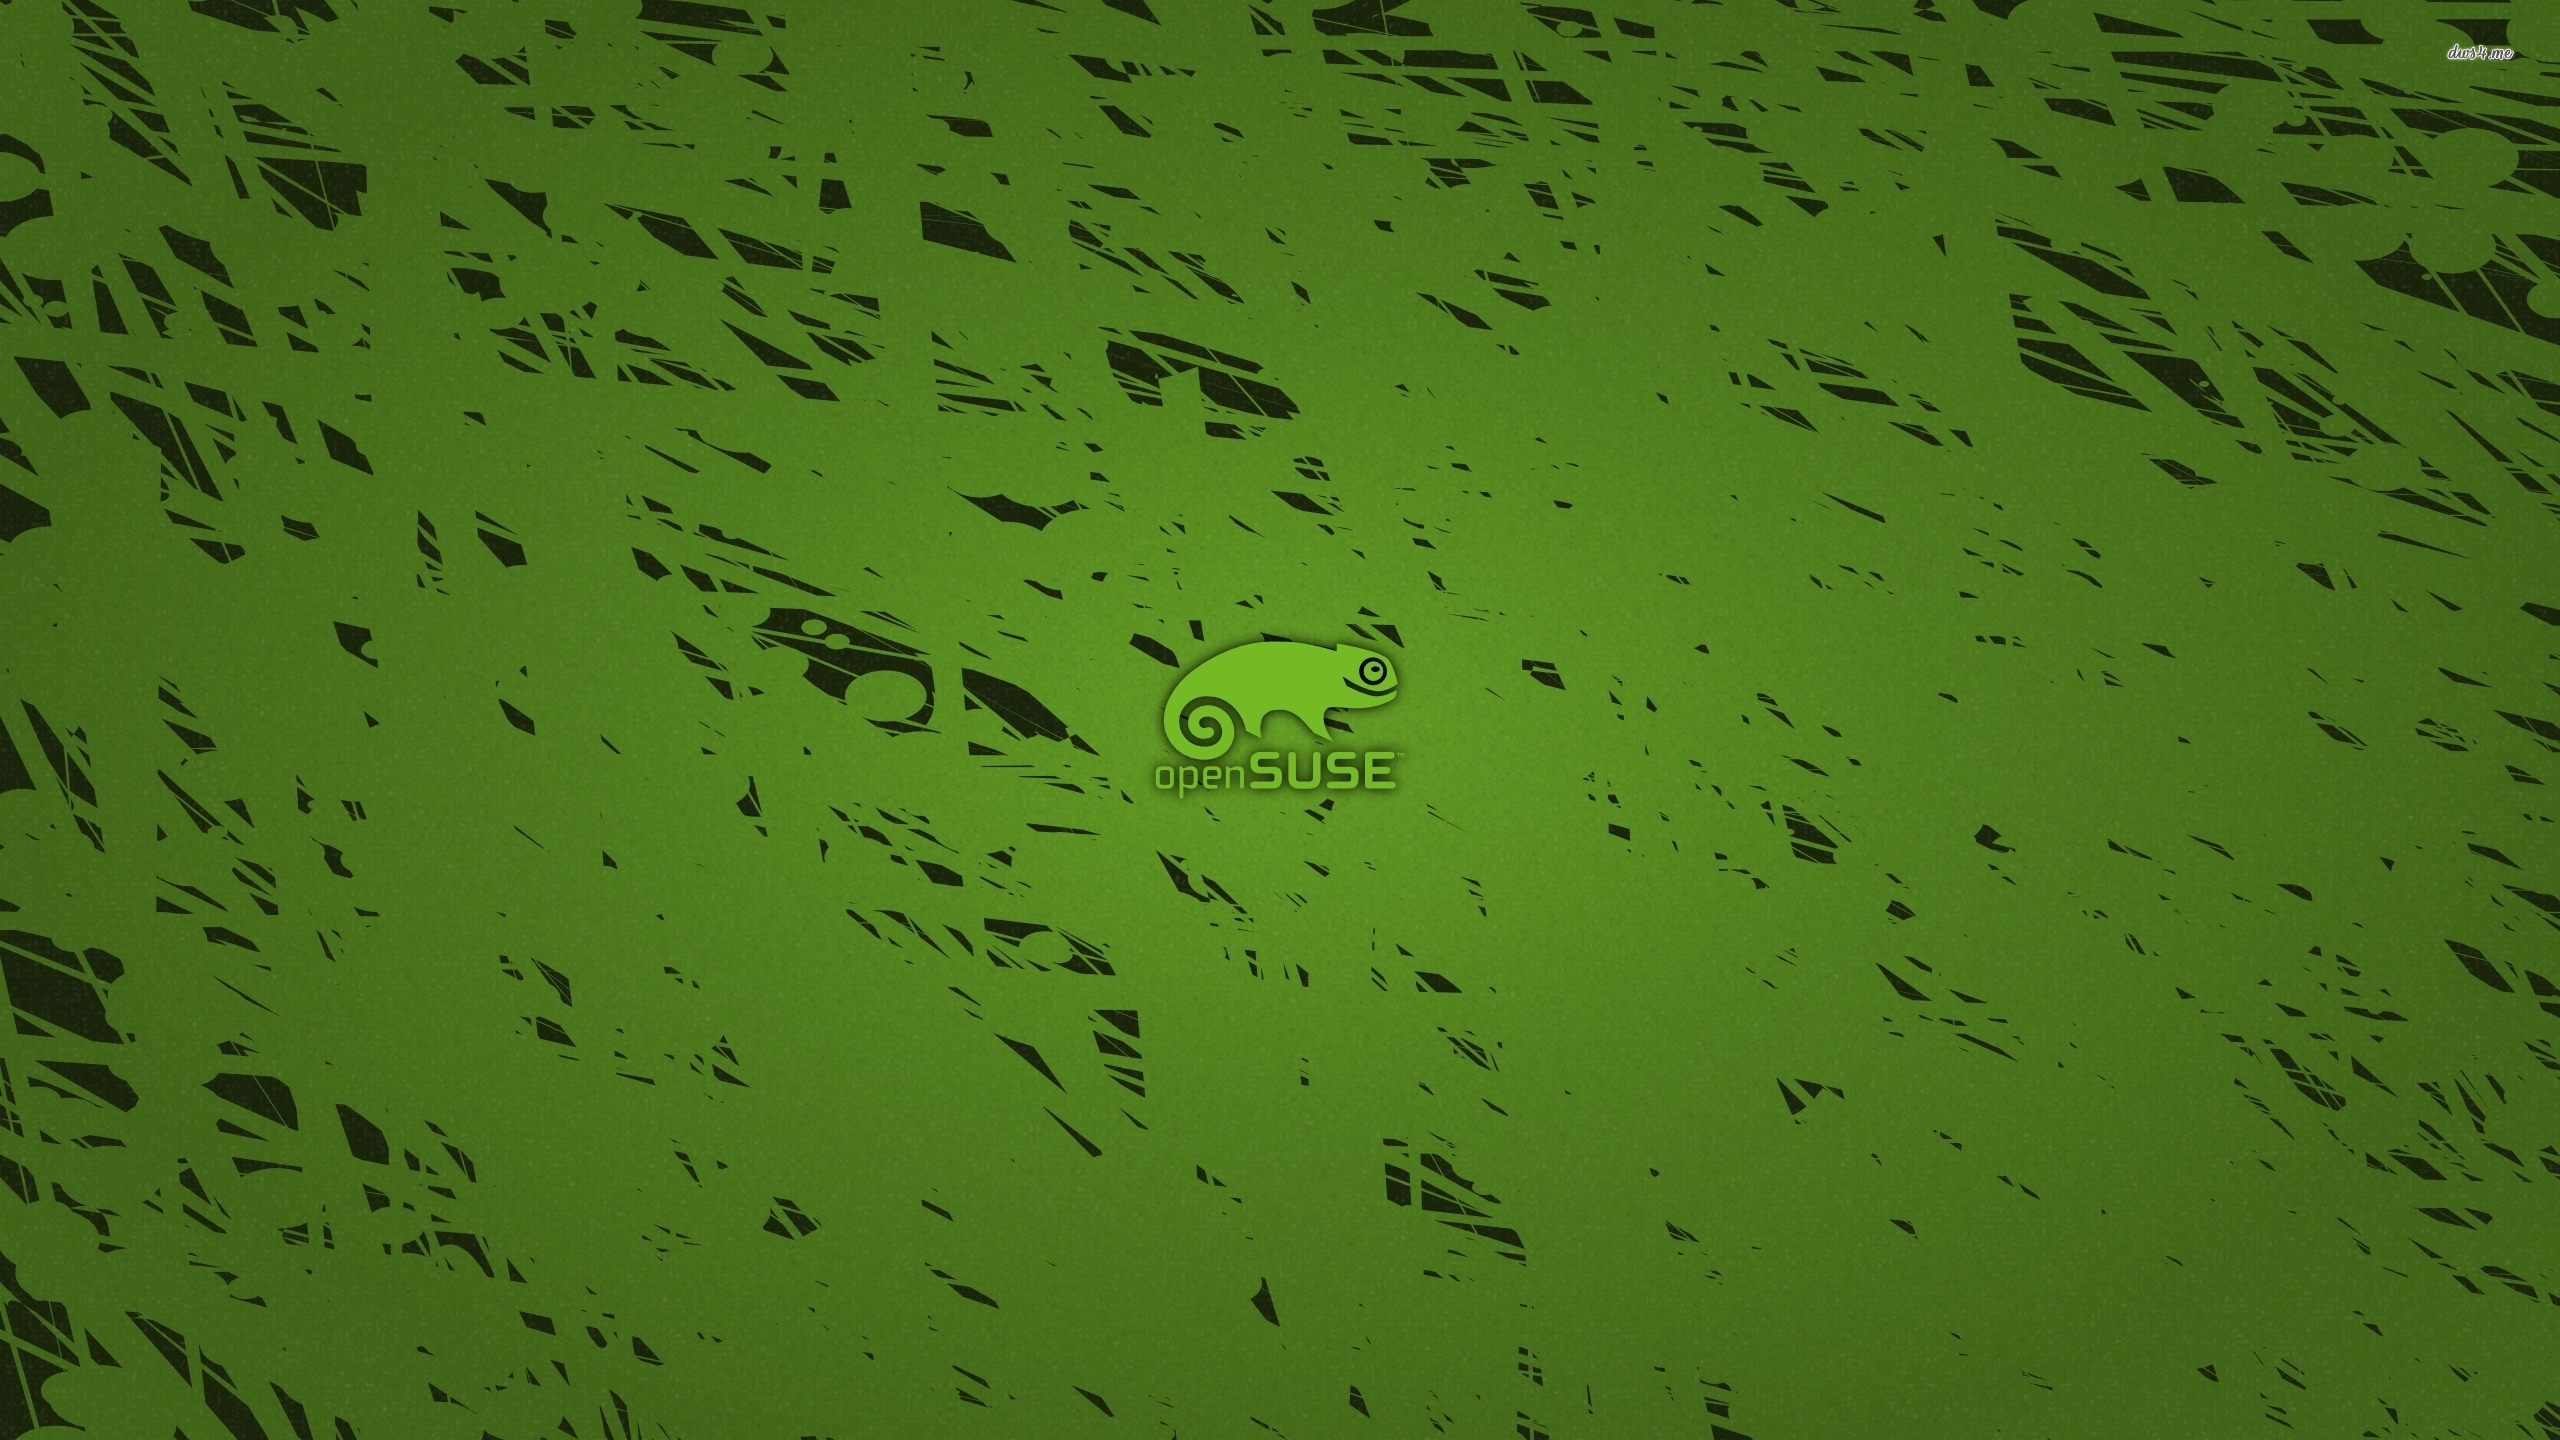 openSUSE wallpaper - Computer wallpapers - #40421